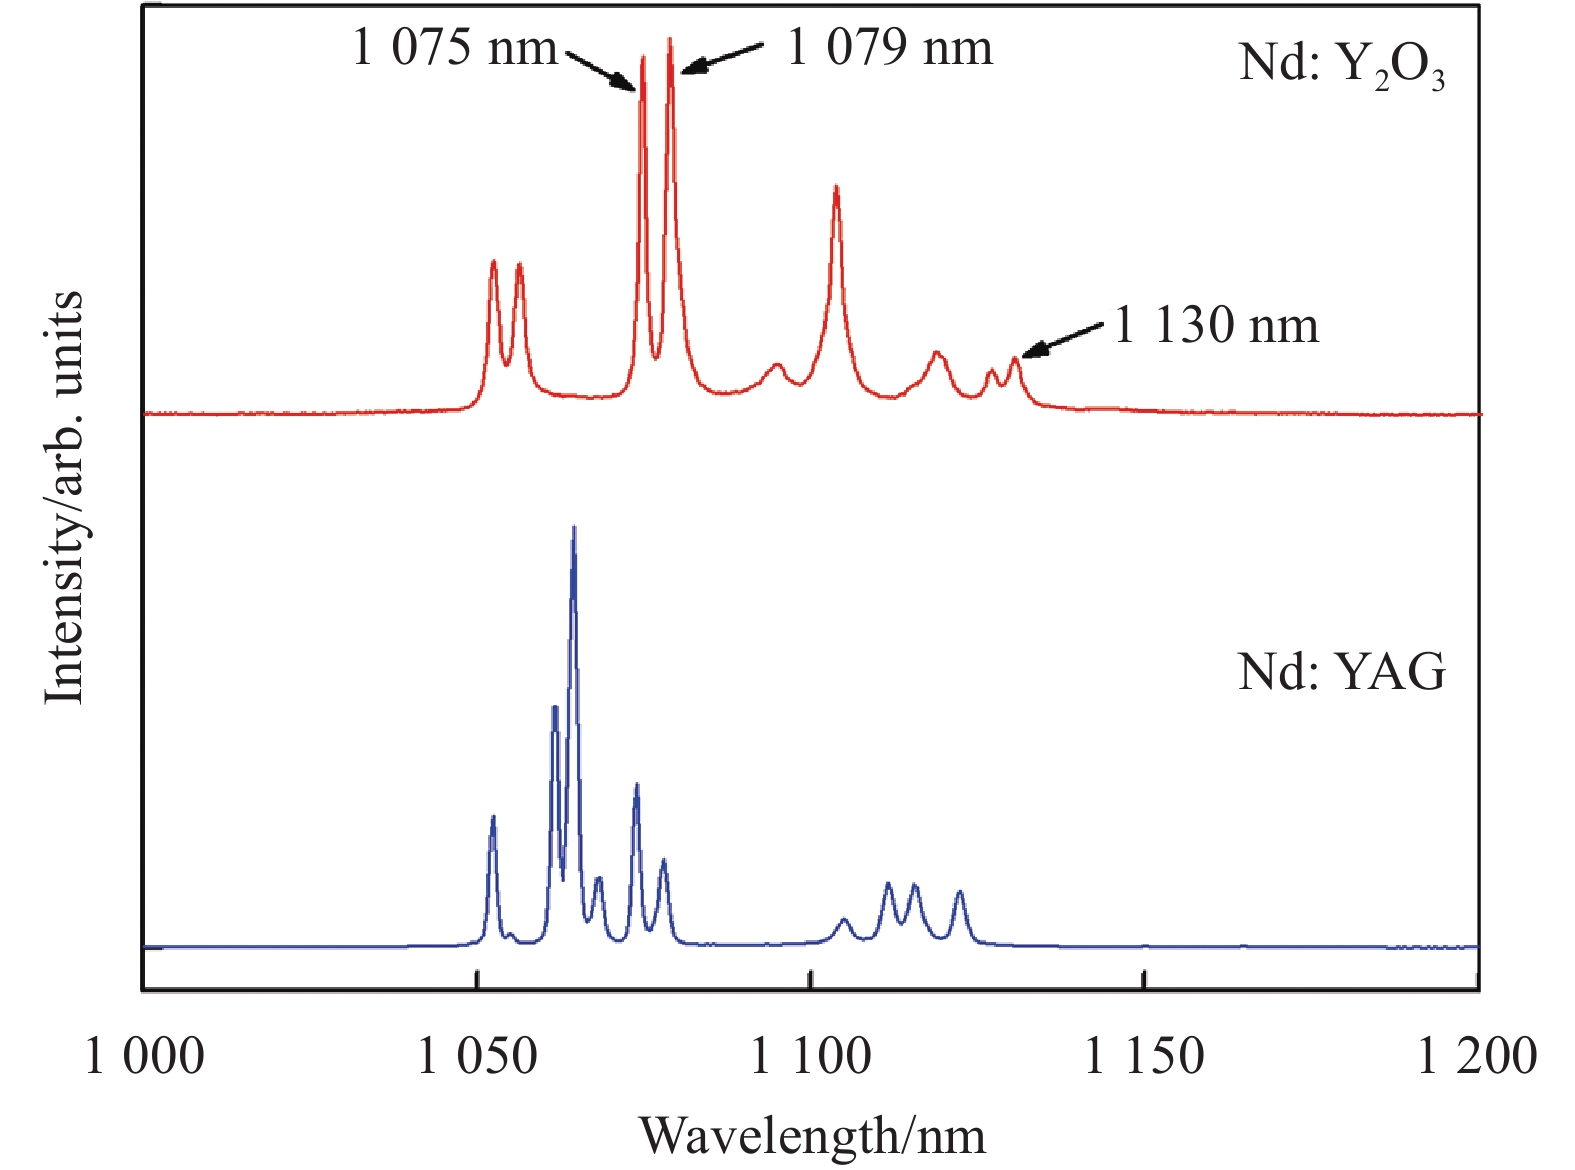 Fluorescence spectra of 4F3/2-4I11/2 energy transitions for both Nd:Y2O3 and Nd:YAG ceramics at room temperature